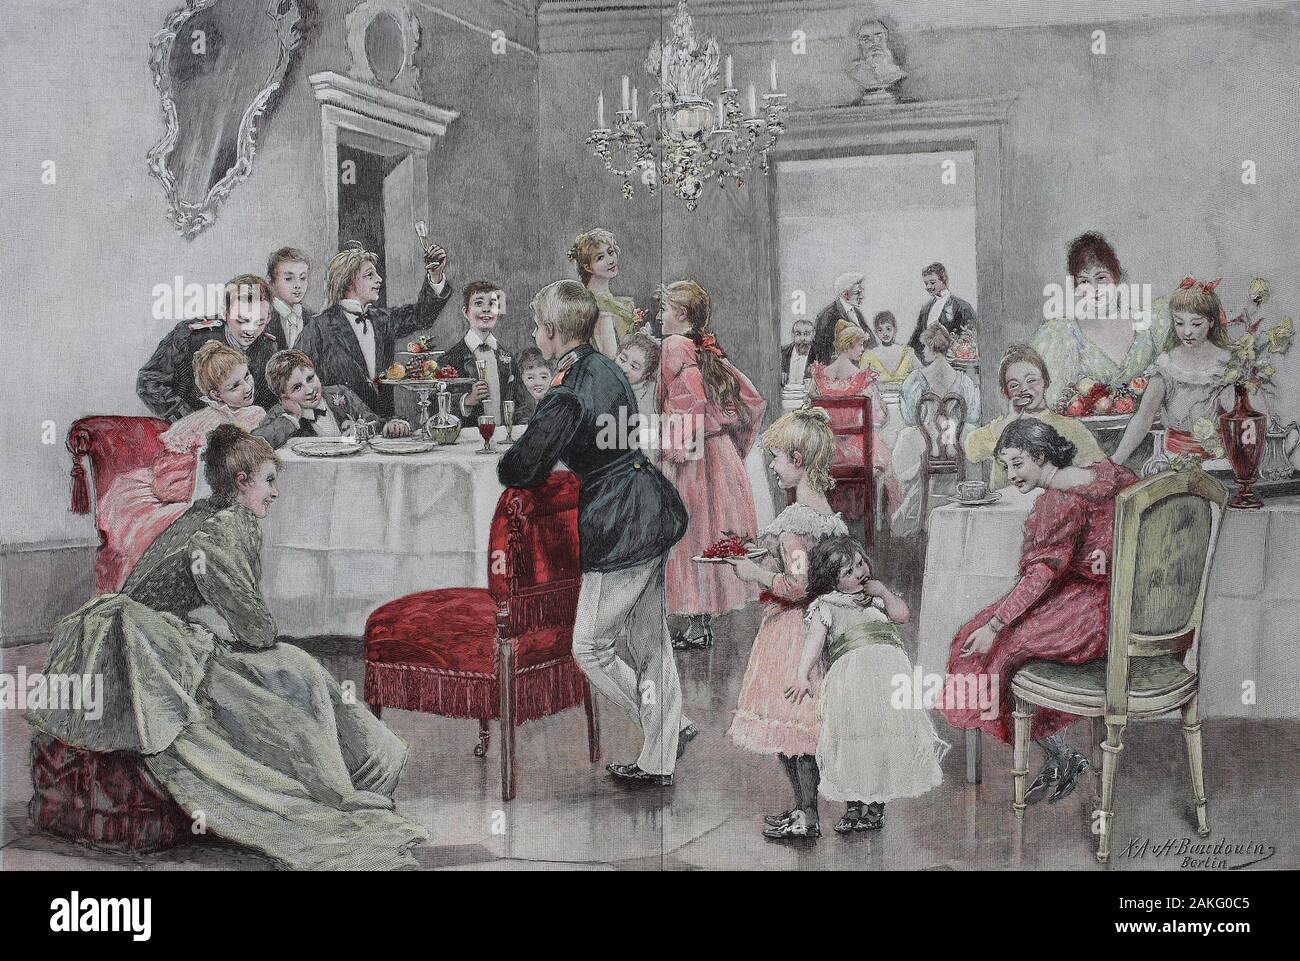 Adolescents celebrate at a family celebration in a separate room  /  Jugendliche feiern bei einer Familienfeier in einem separaten Raum , digital improved reproduction of an original from the 19th century / digitale Reproduktion einer Originalvorlage aus dem 19. Jahrhundert Stock Photo